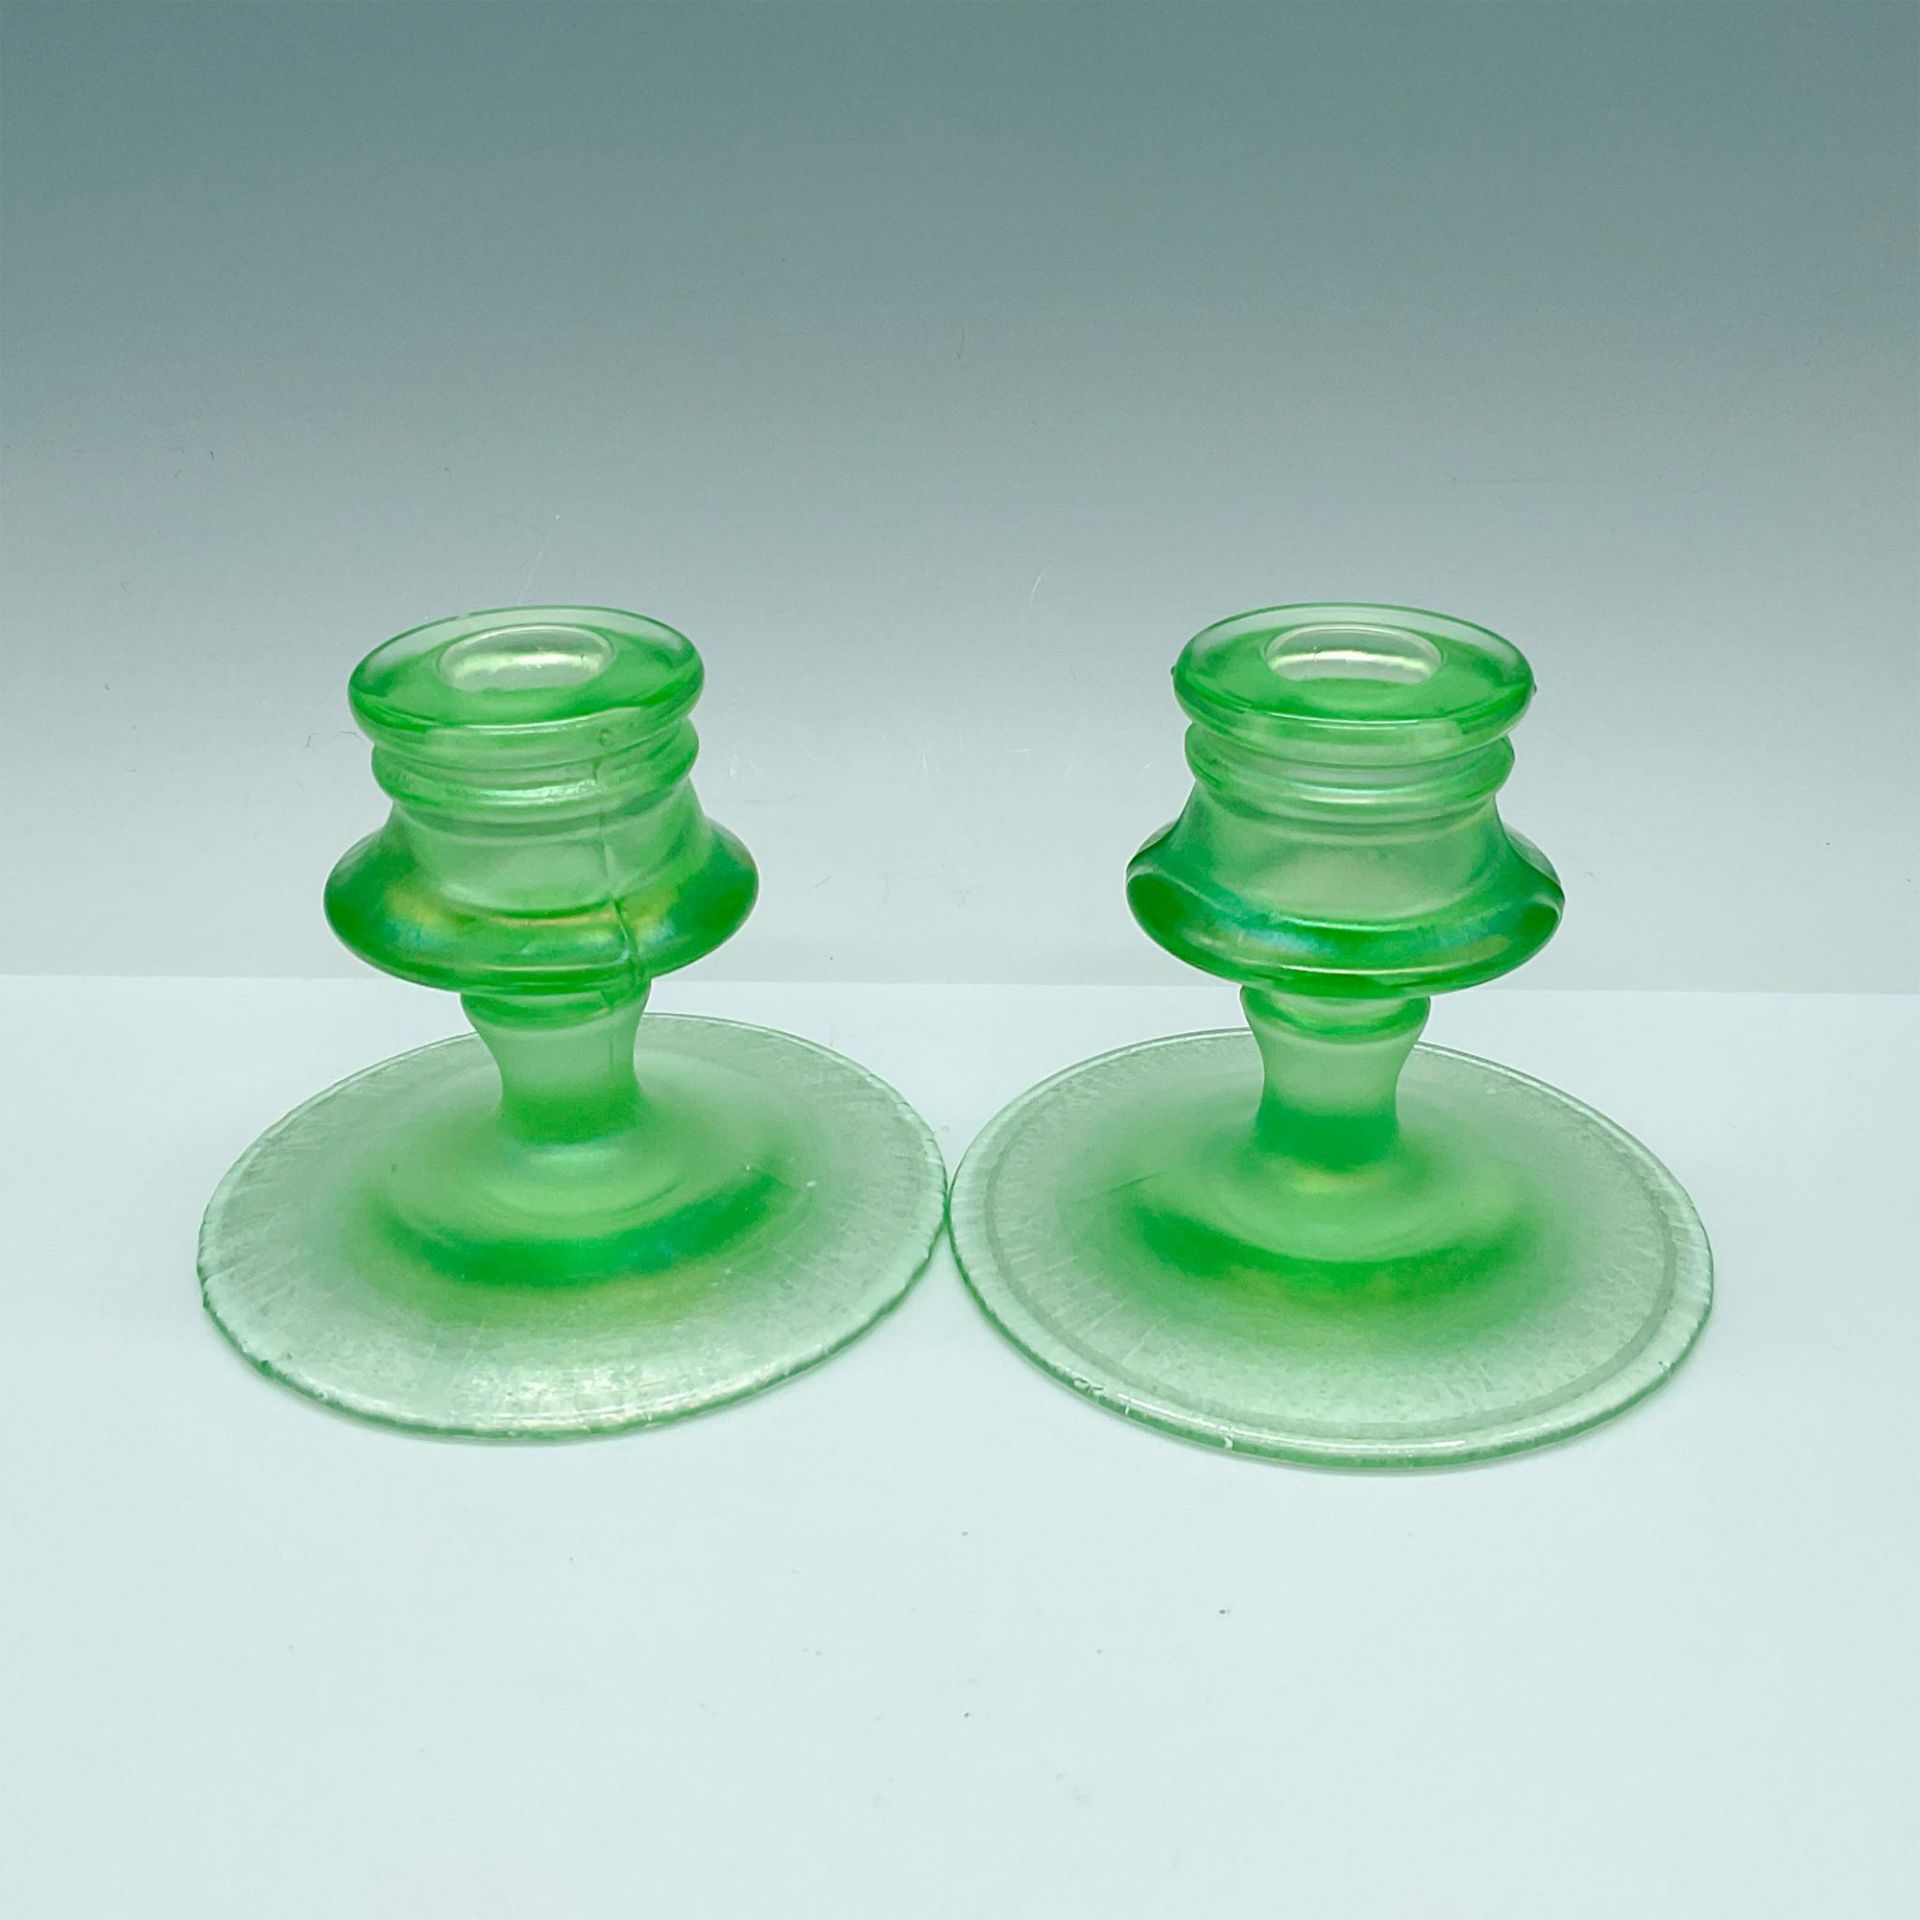 Pair of Antique Fenton Florentine Green Candle Holders - Image 2 of 3